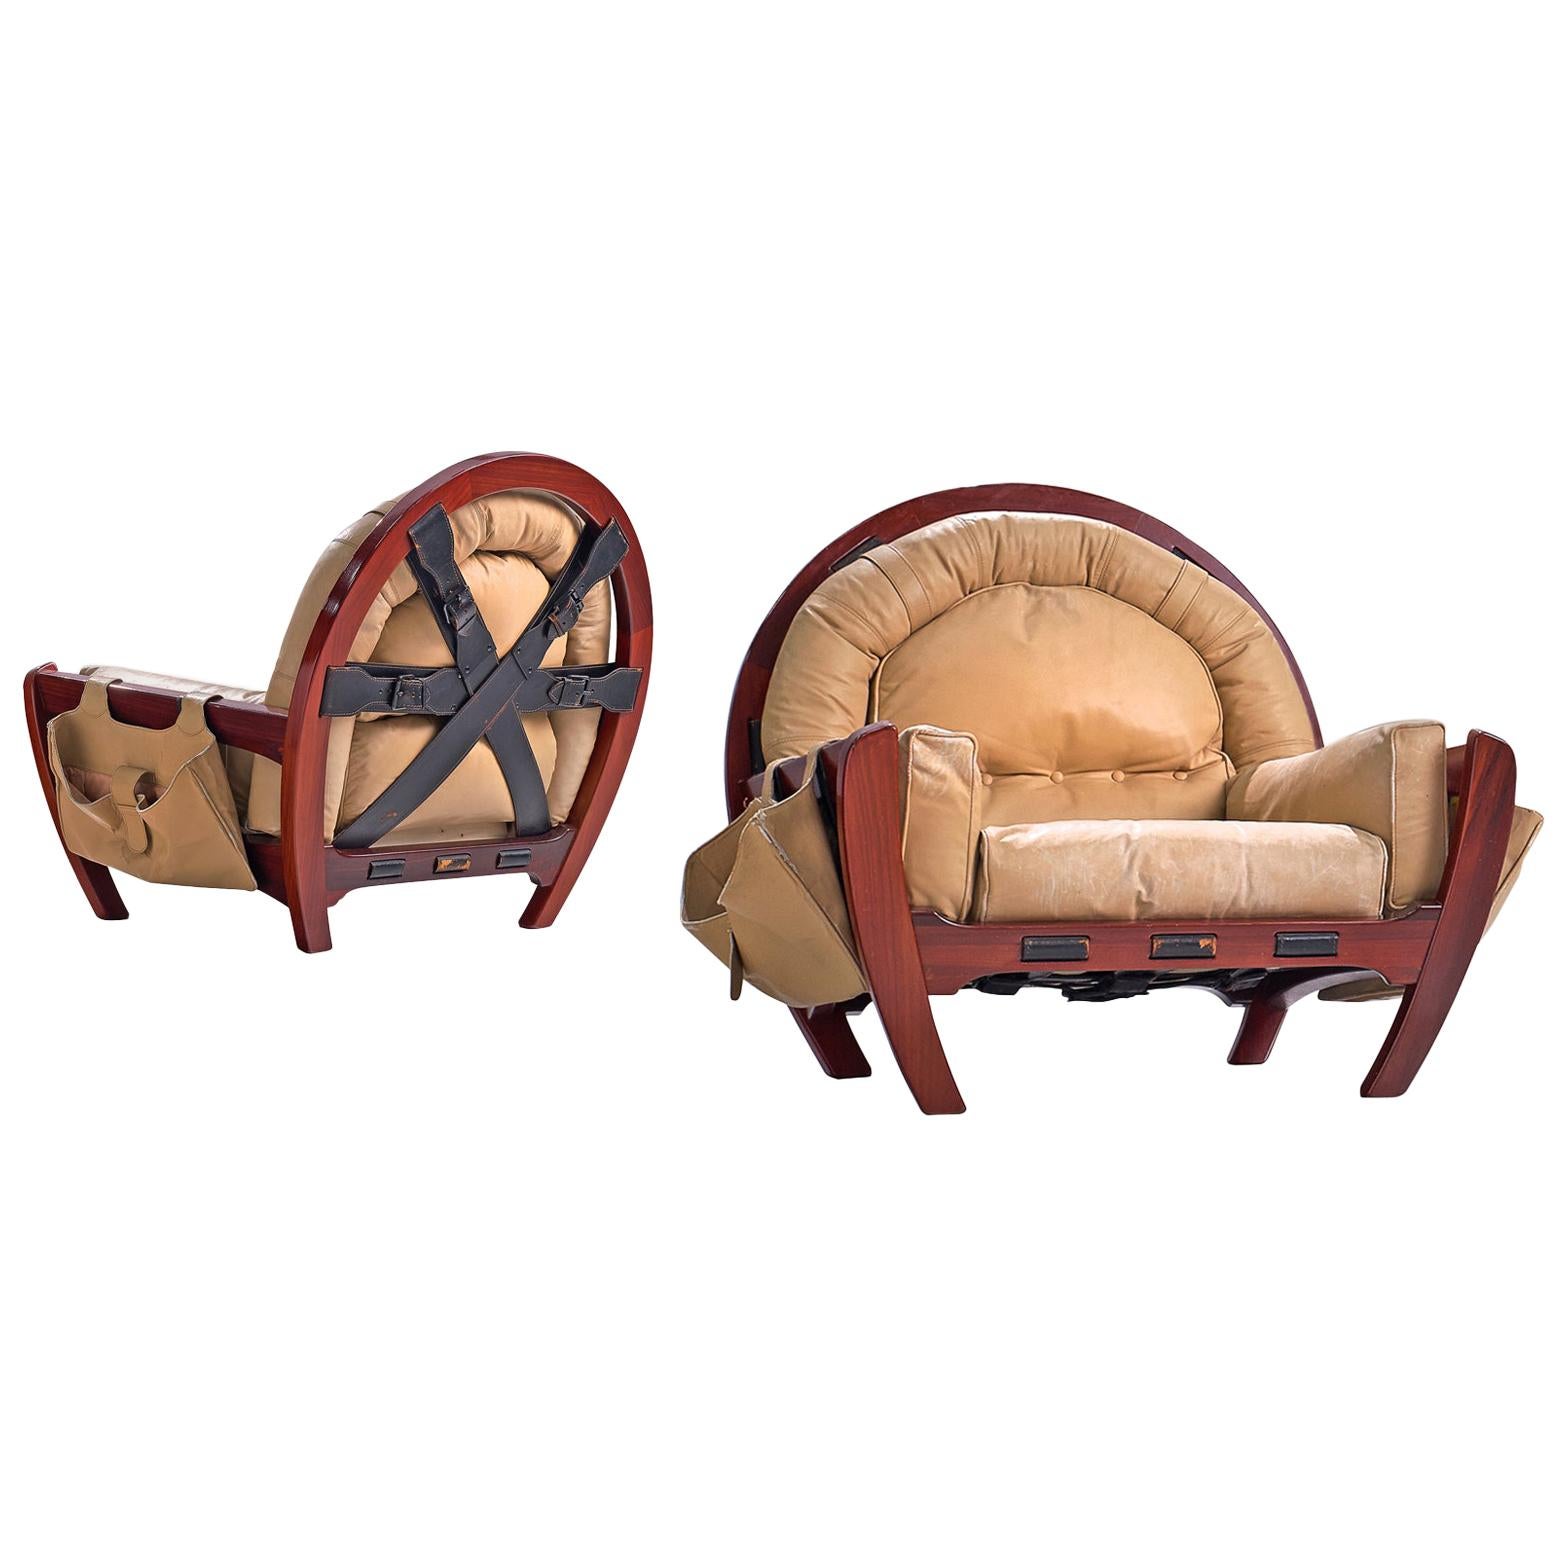 Pair of 'Rancero' Lounge Chairs of Luciano Frigerio